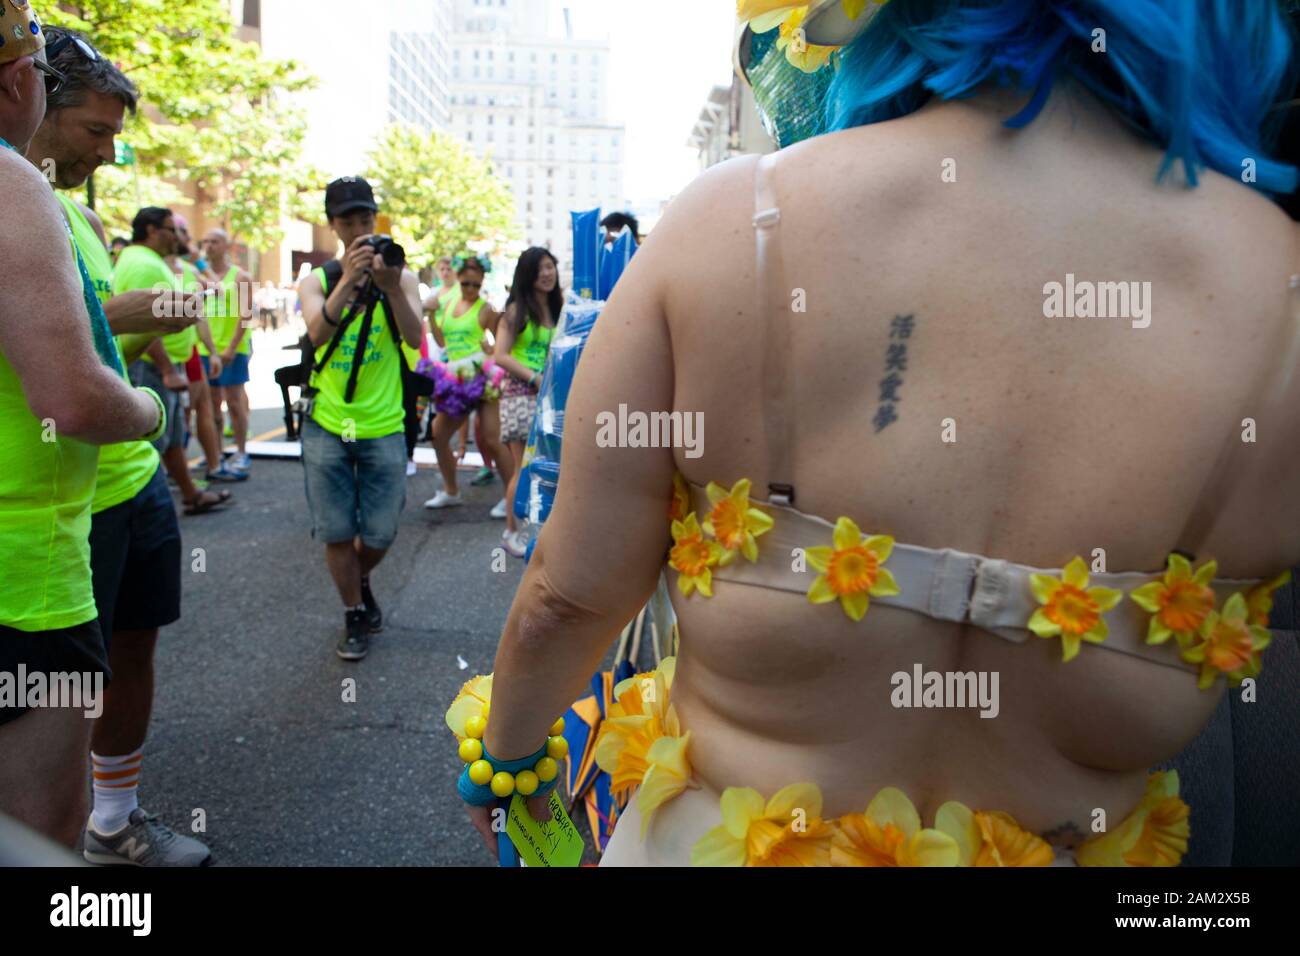 Pride parade participant being photographed, Vancouver Pride Festival 2014, Vancouver, Canada Stock Photo